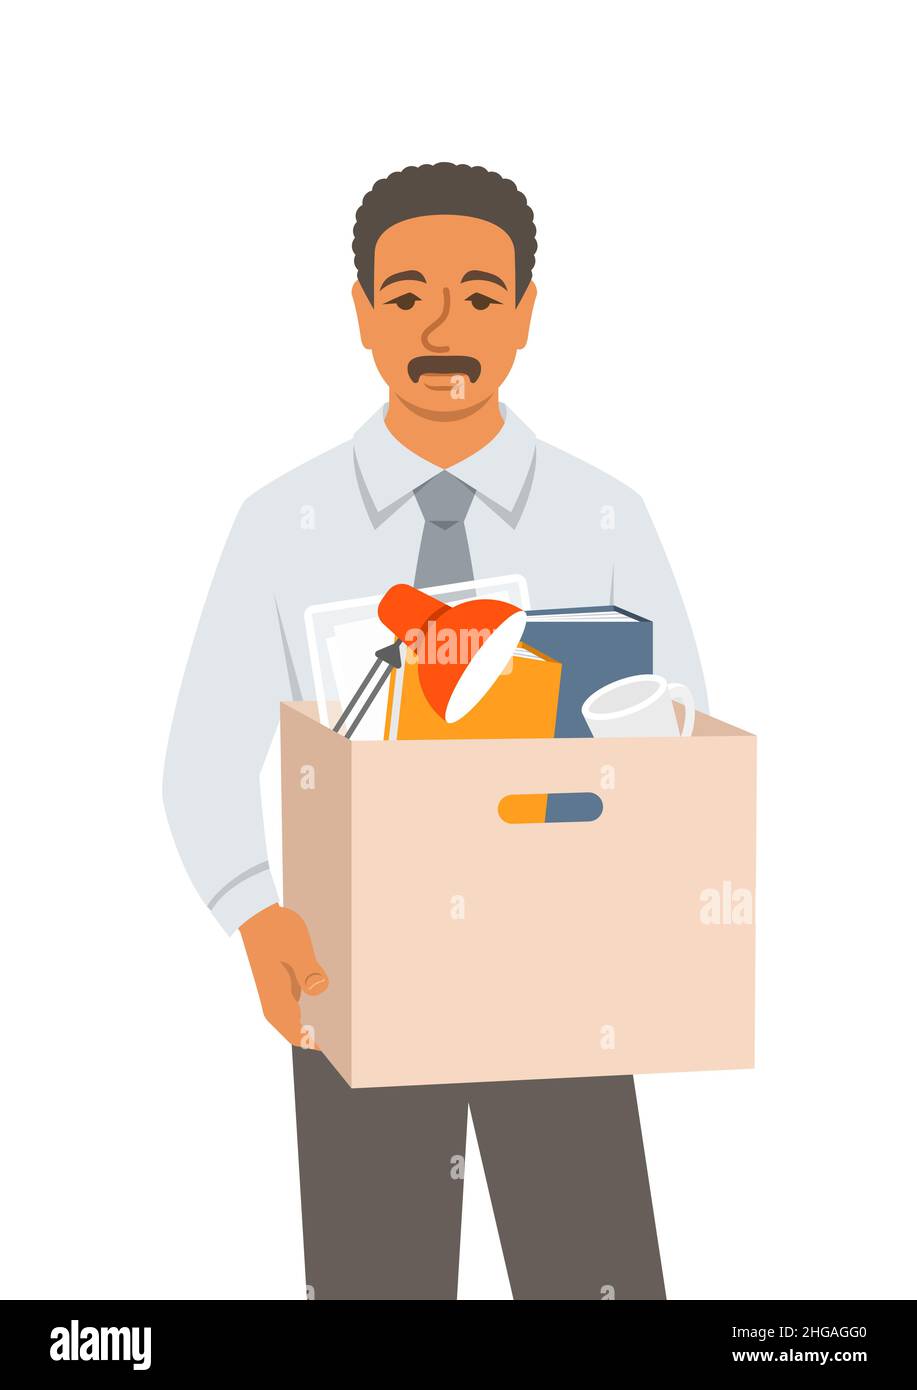 Unemployed fired black man. Sad jobless office worker holds box with personal stuff. Unhappy upset face worried about job loss. Unemployment during th Stock Vector